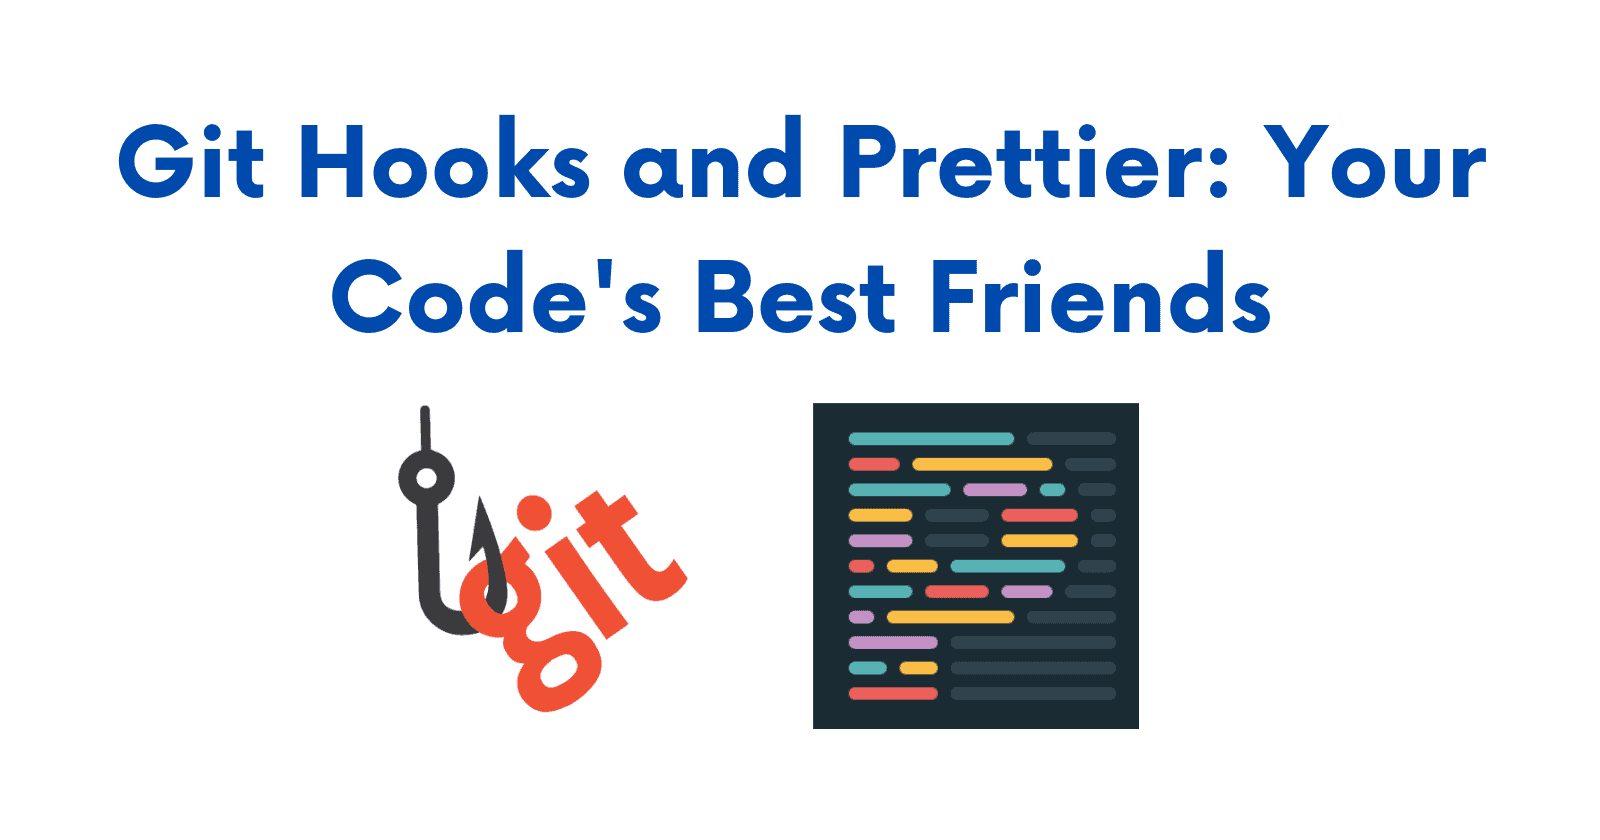 Git Hooks and Prettier: Your Code’s Best Friends